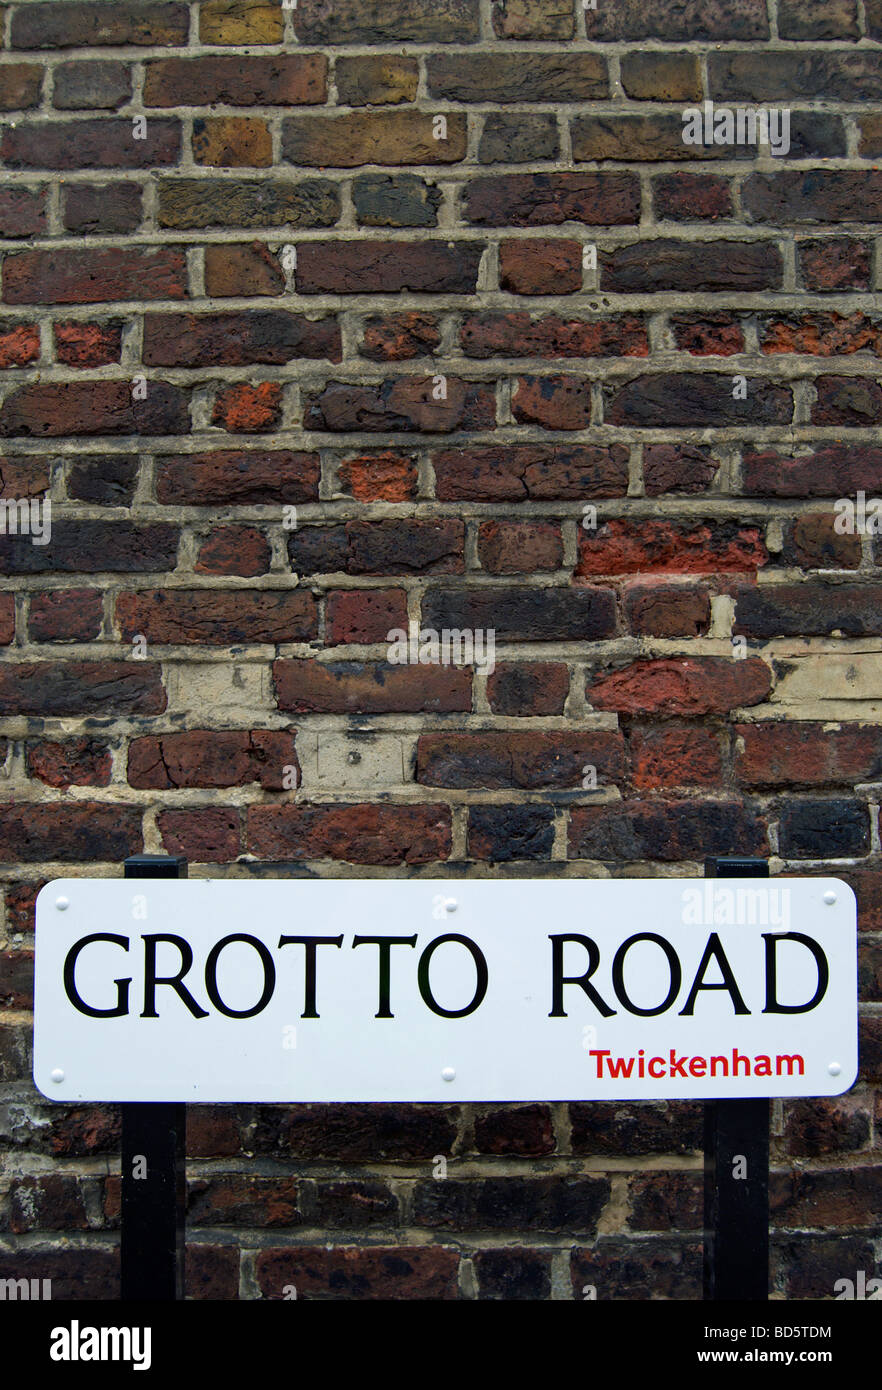 grotto road, named after the grotto of 18th century satirical writer and local resident alexander pope, twickenham, england Stock Photo